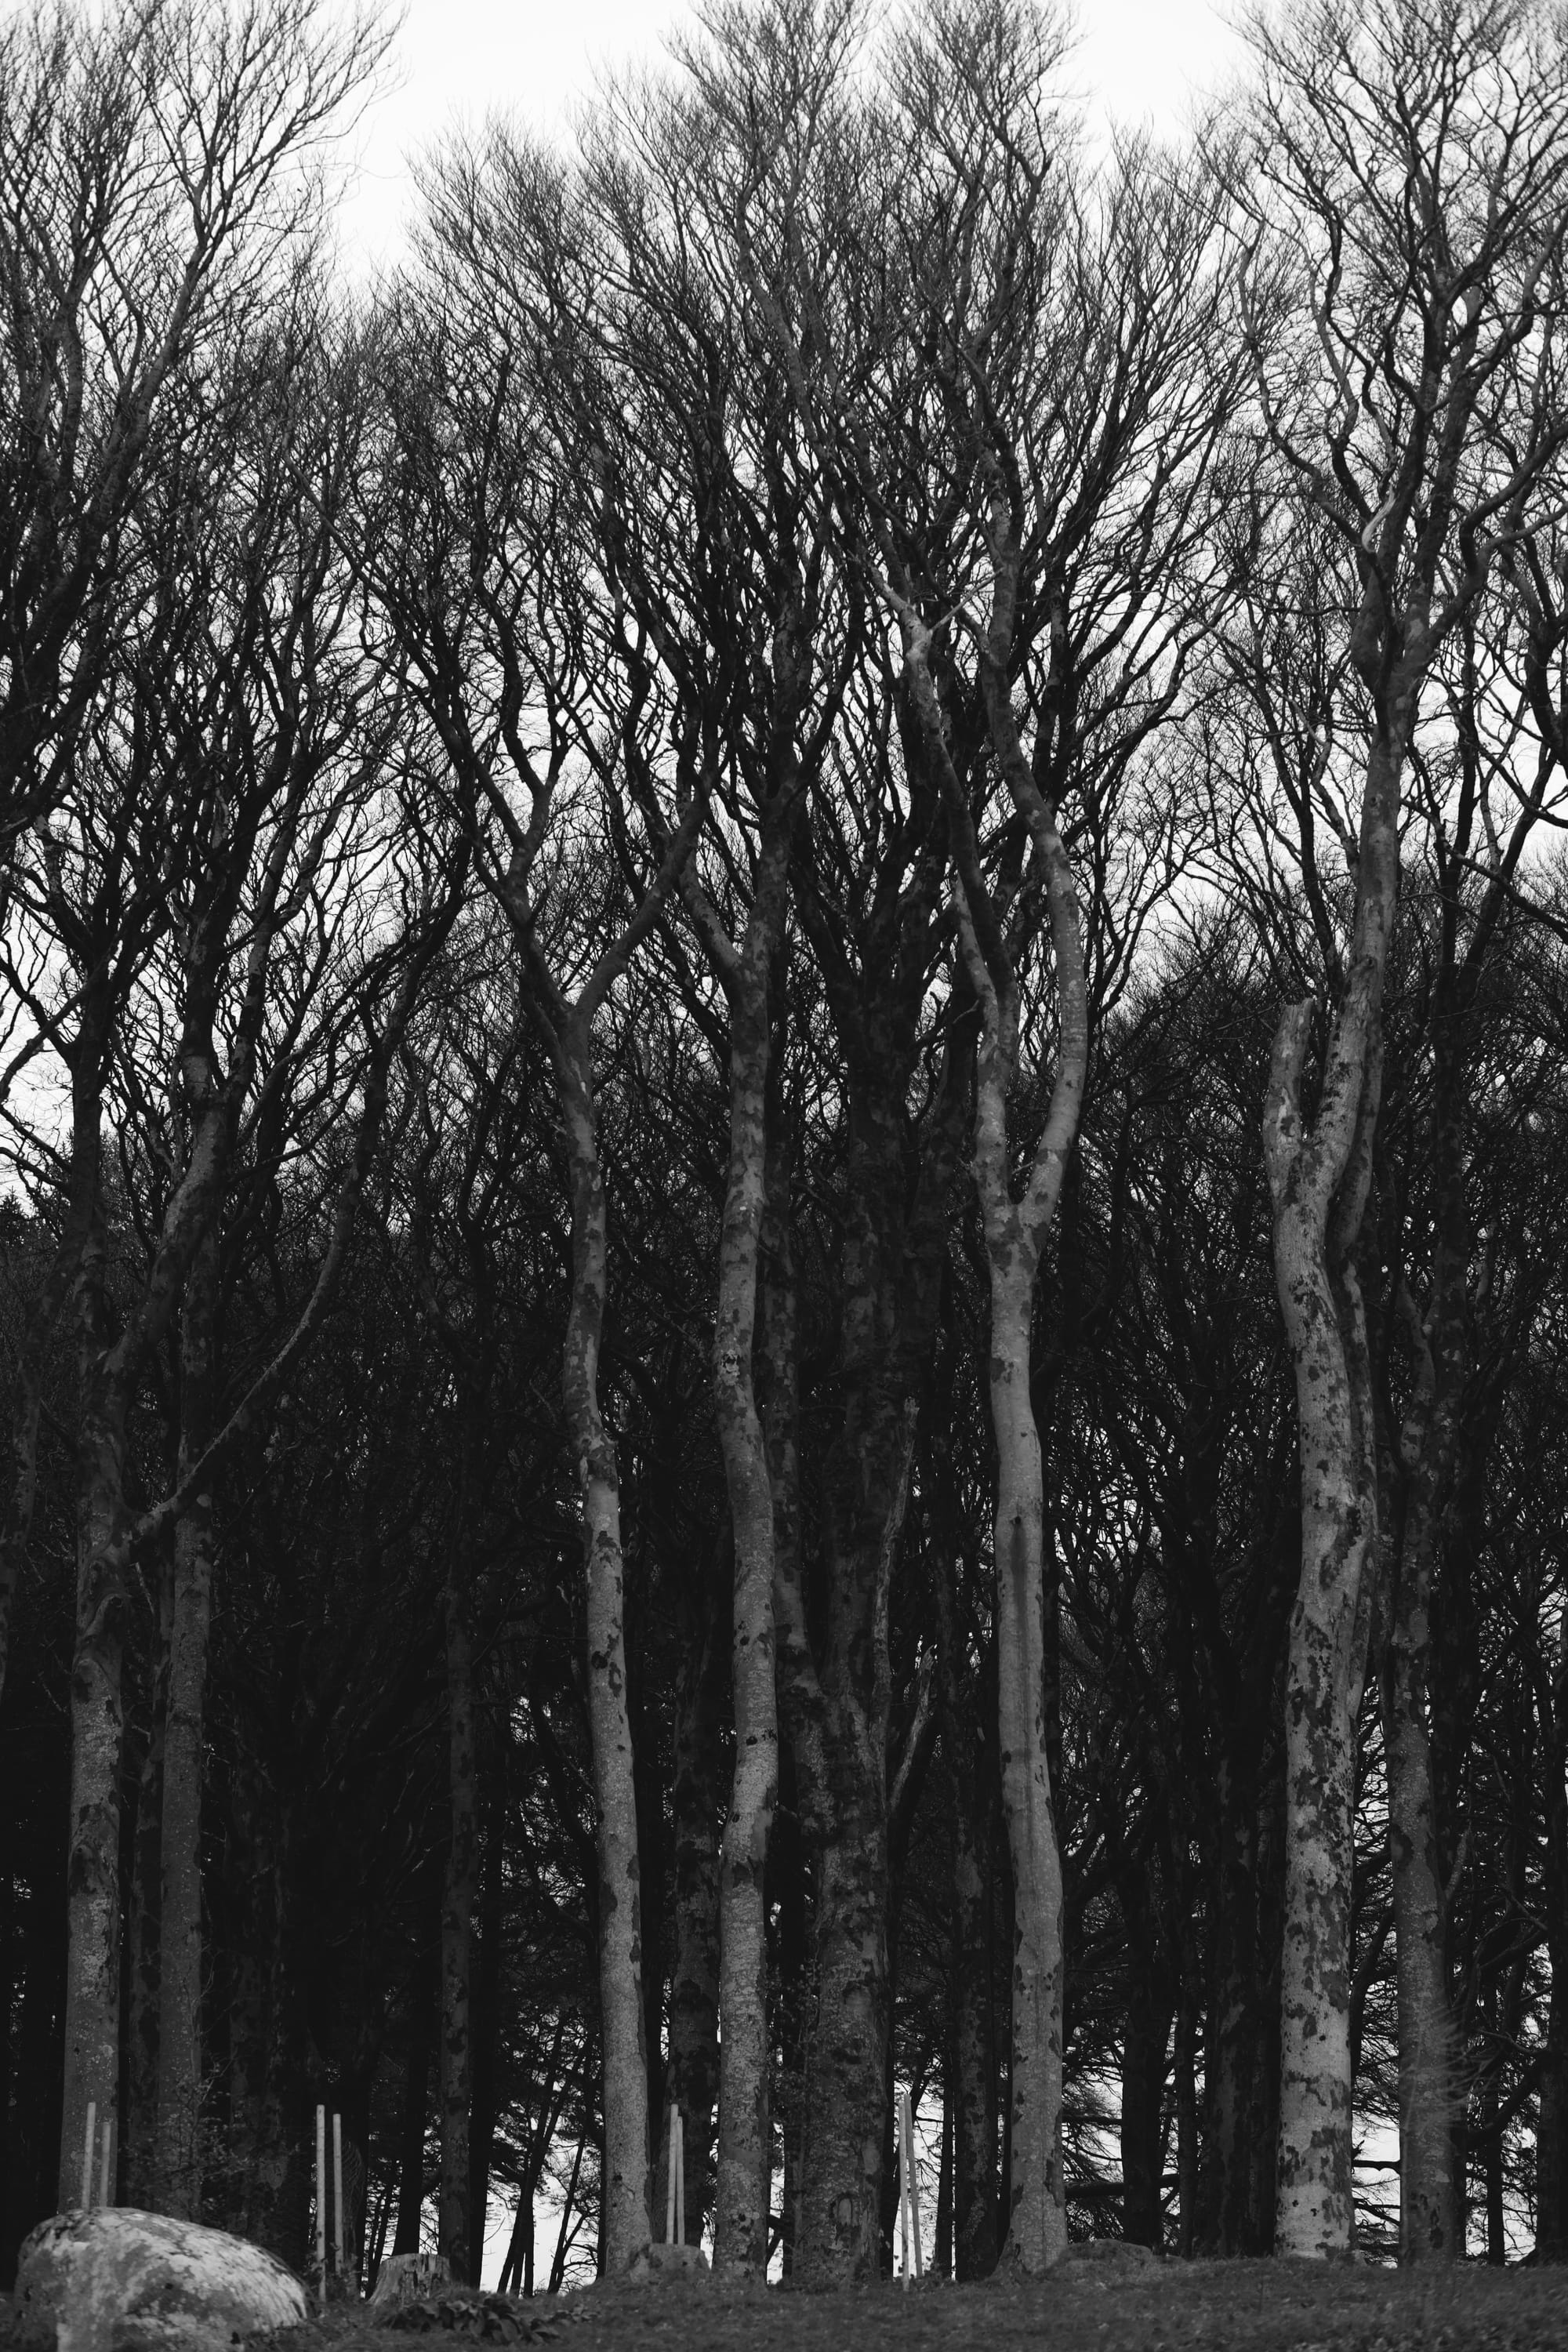 A black and white photo of tall trees